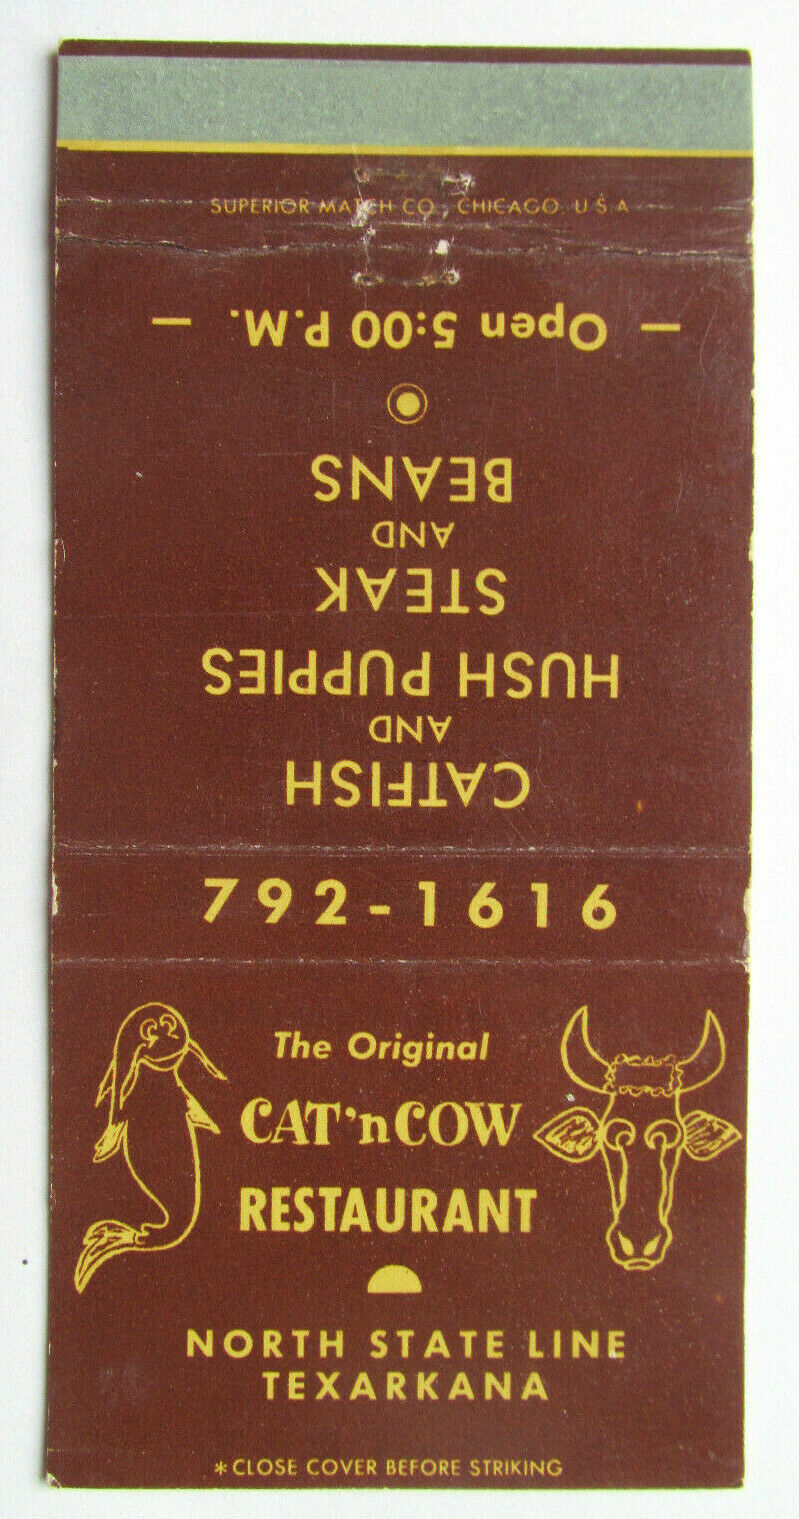 Primary image for Cat 'n Cow Restaurant - North State Line Texarkana, Texas 30FS Matchbook Cover